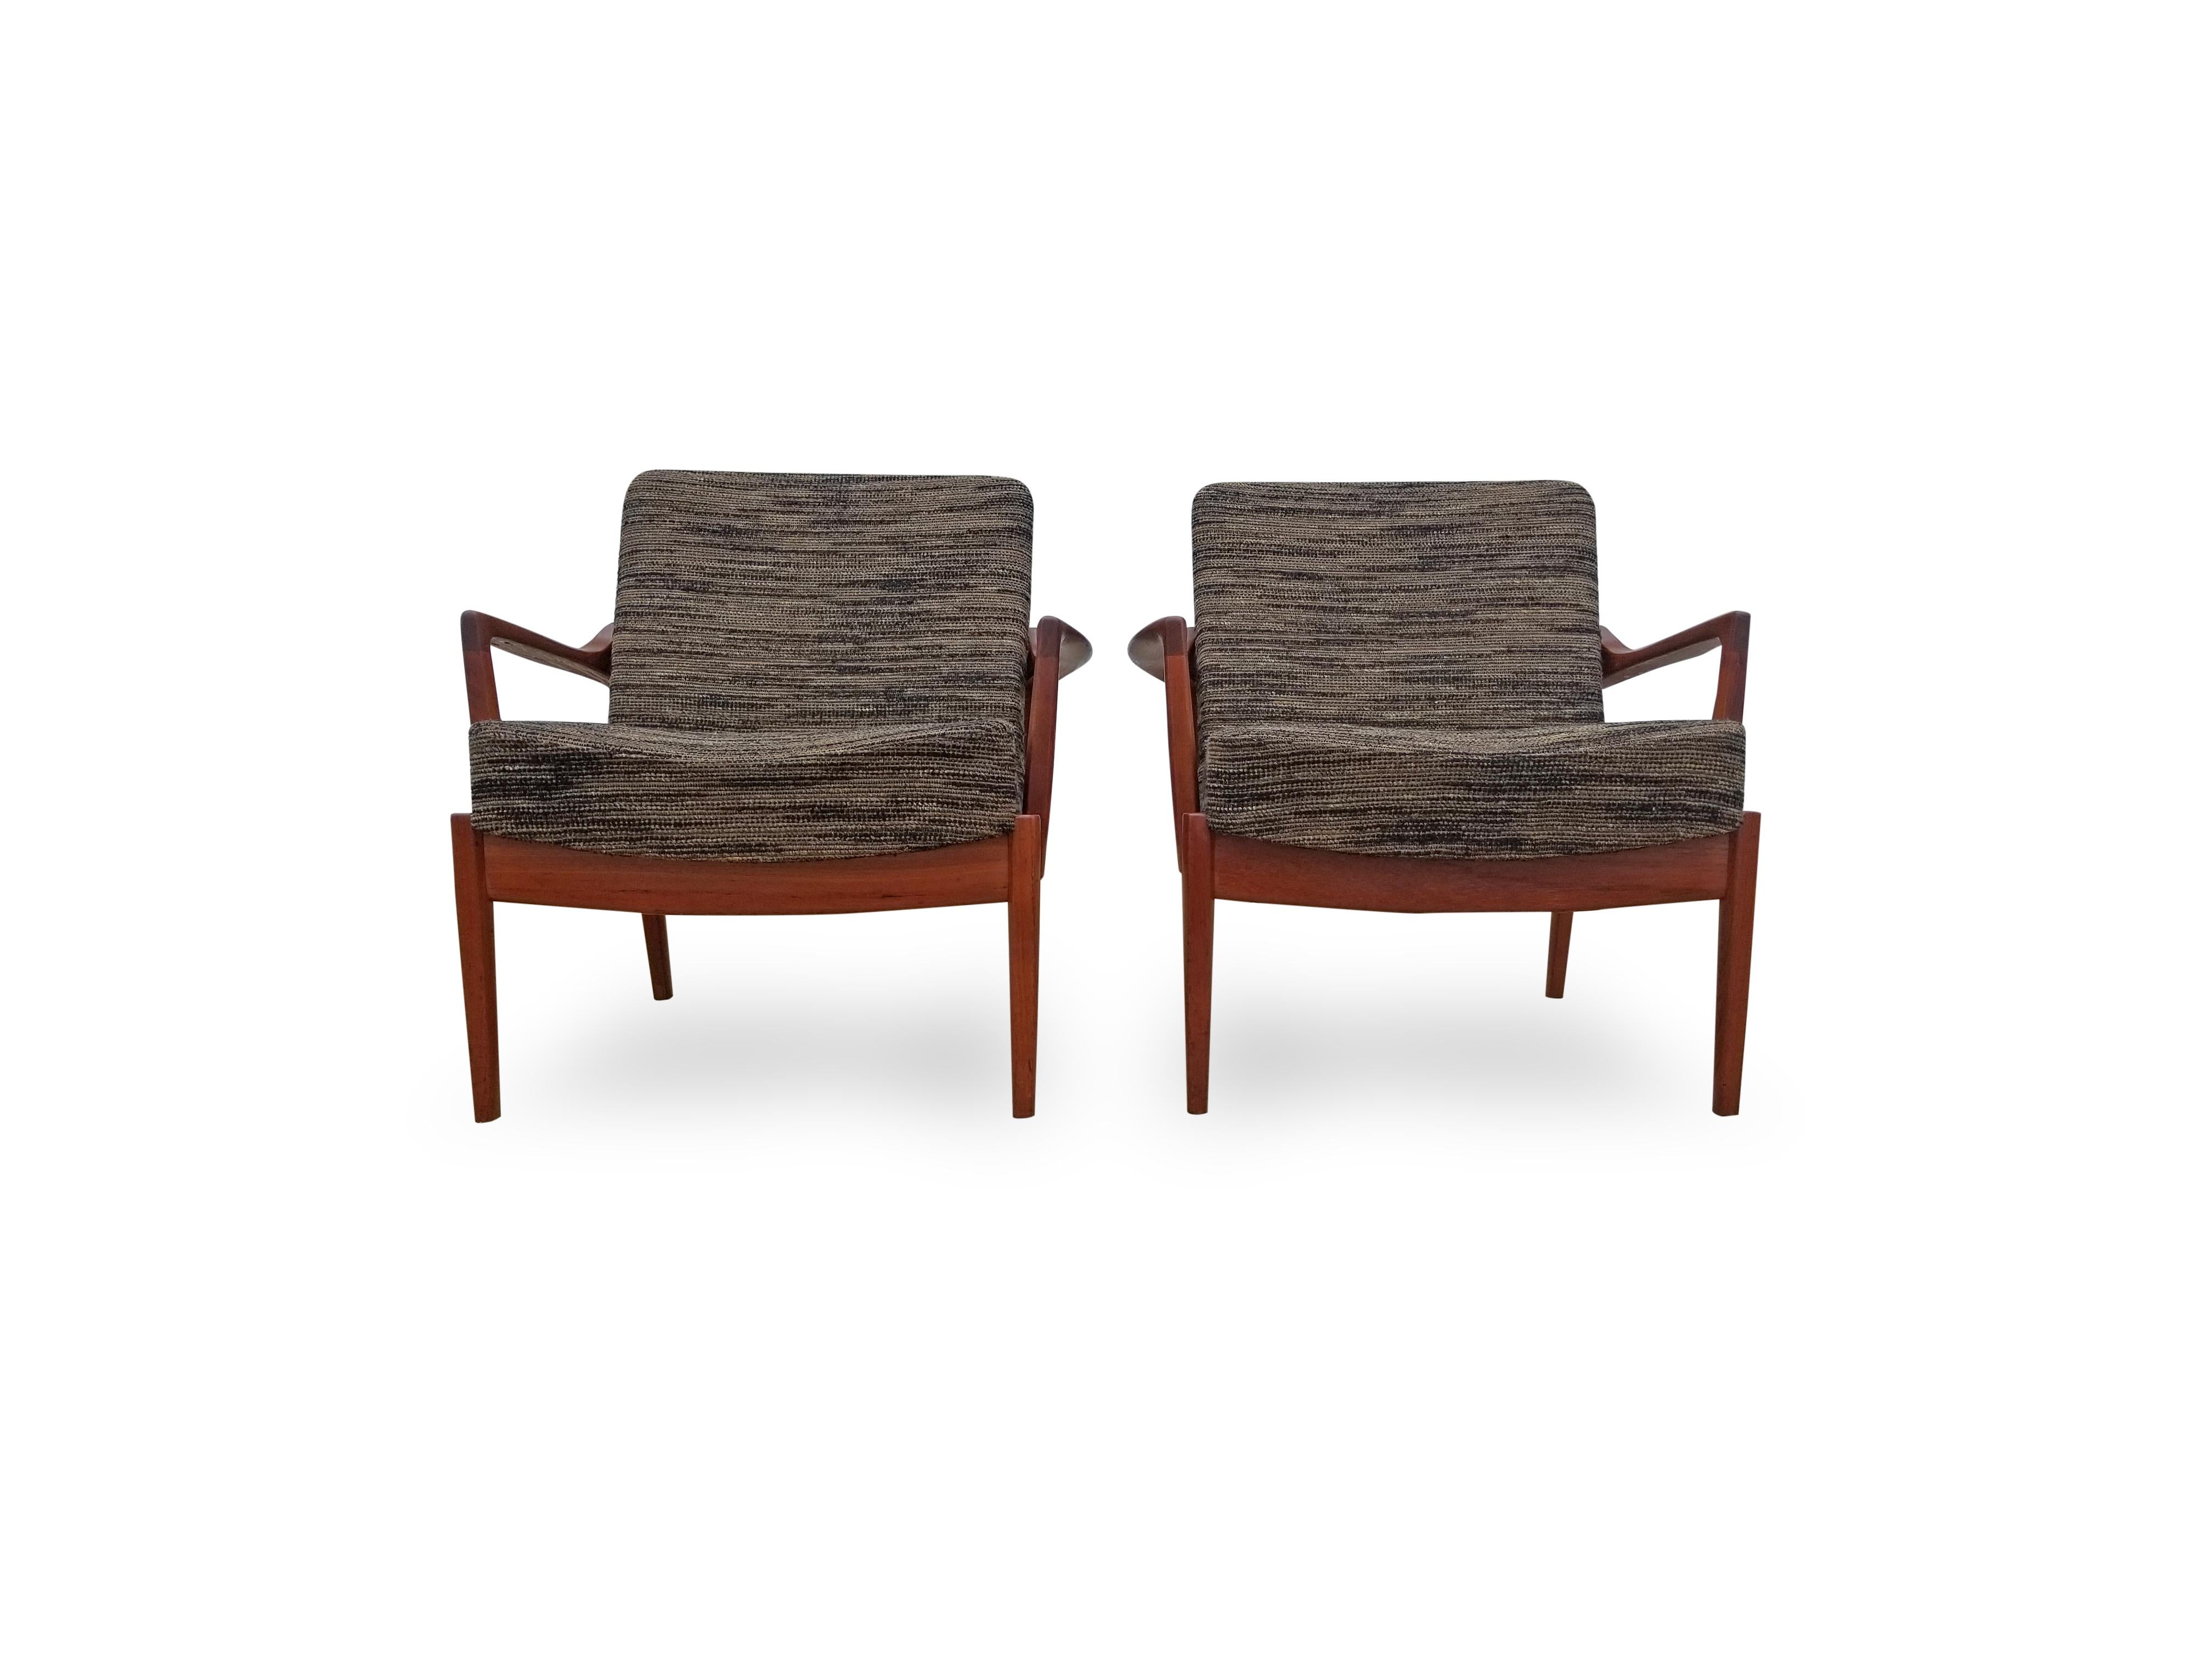 20th Century Pair of Tove and Edvard Kindt-Larsen Lounge Chairs For Sale